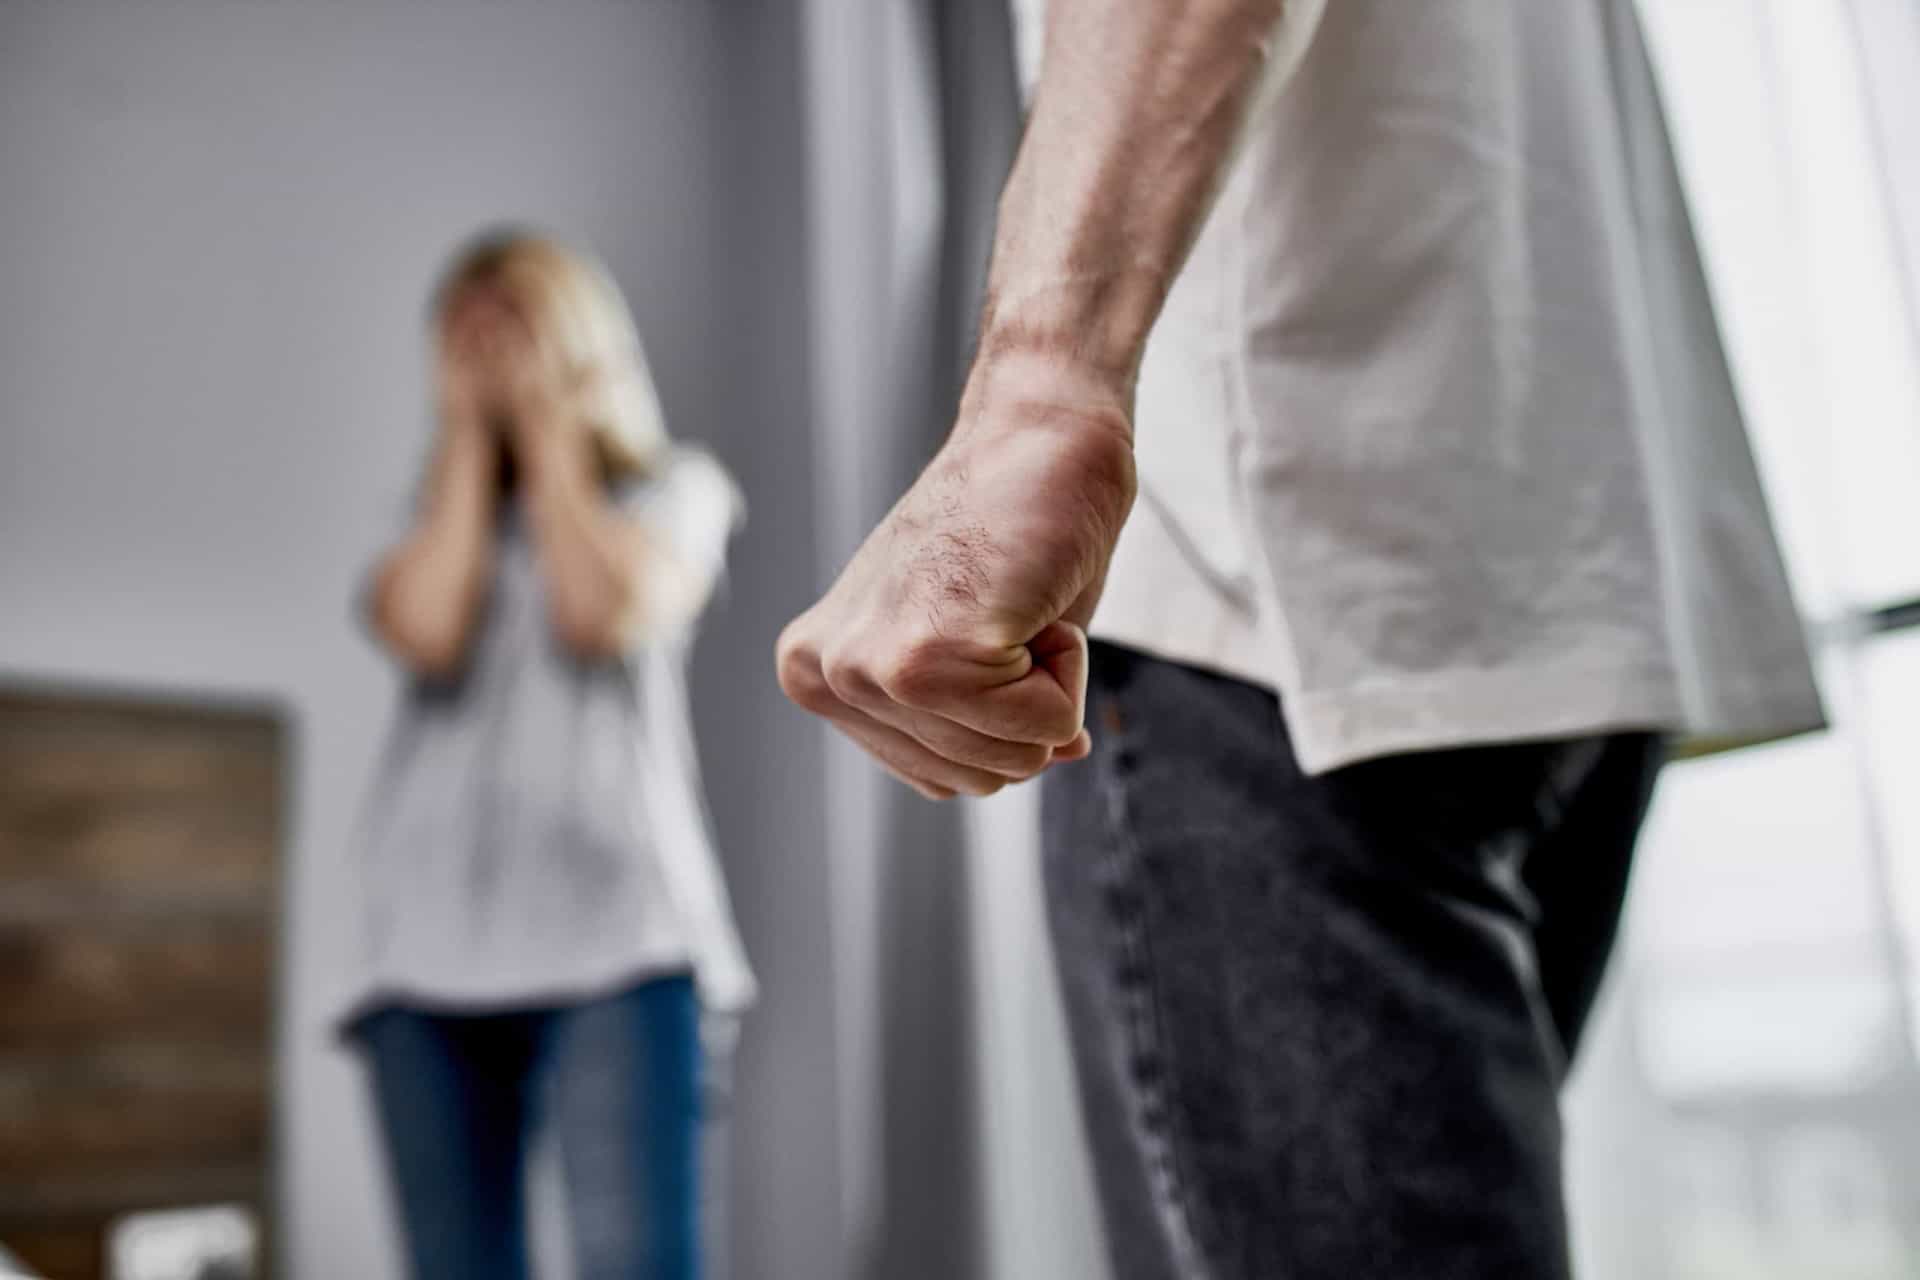 <p>It's of the utmost importance to feel safe in a relationship. Whether it's verbal, emotional, or physical abuse, this kind of danger needs to be taken seriously and addressed immediately. If you need help, reach out to someone or call a helpline. </p><p>Sources: (<a href="https://www.talkspace.com/blog/relationship-problems/" rel="noopener">Talk Space</a>) (<a href="https://www.marriage.com/advice/relationship/solutions-for-8-common-relationship-issues/" rel="noopener">Marriage</a>)</p><p>See also: <a href="https://www.starsinsider.com/lifestyle/497076/how-to-survive-past-the-honeymoon-phase-of-a-relationship">How to survive past the honeymoon phase of a relationship</a></p><p><a href="https://www.msn.com/en-us/community/channel/vid-7xx8mnucu55yw63we9va2gwr7uihbxwc68fxqp25x6tg4ftibpra?cvid=94631541bc0f4f89bfd59158d696ad7e">Follow us and access great exclusive content everyday</a></p>